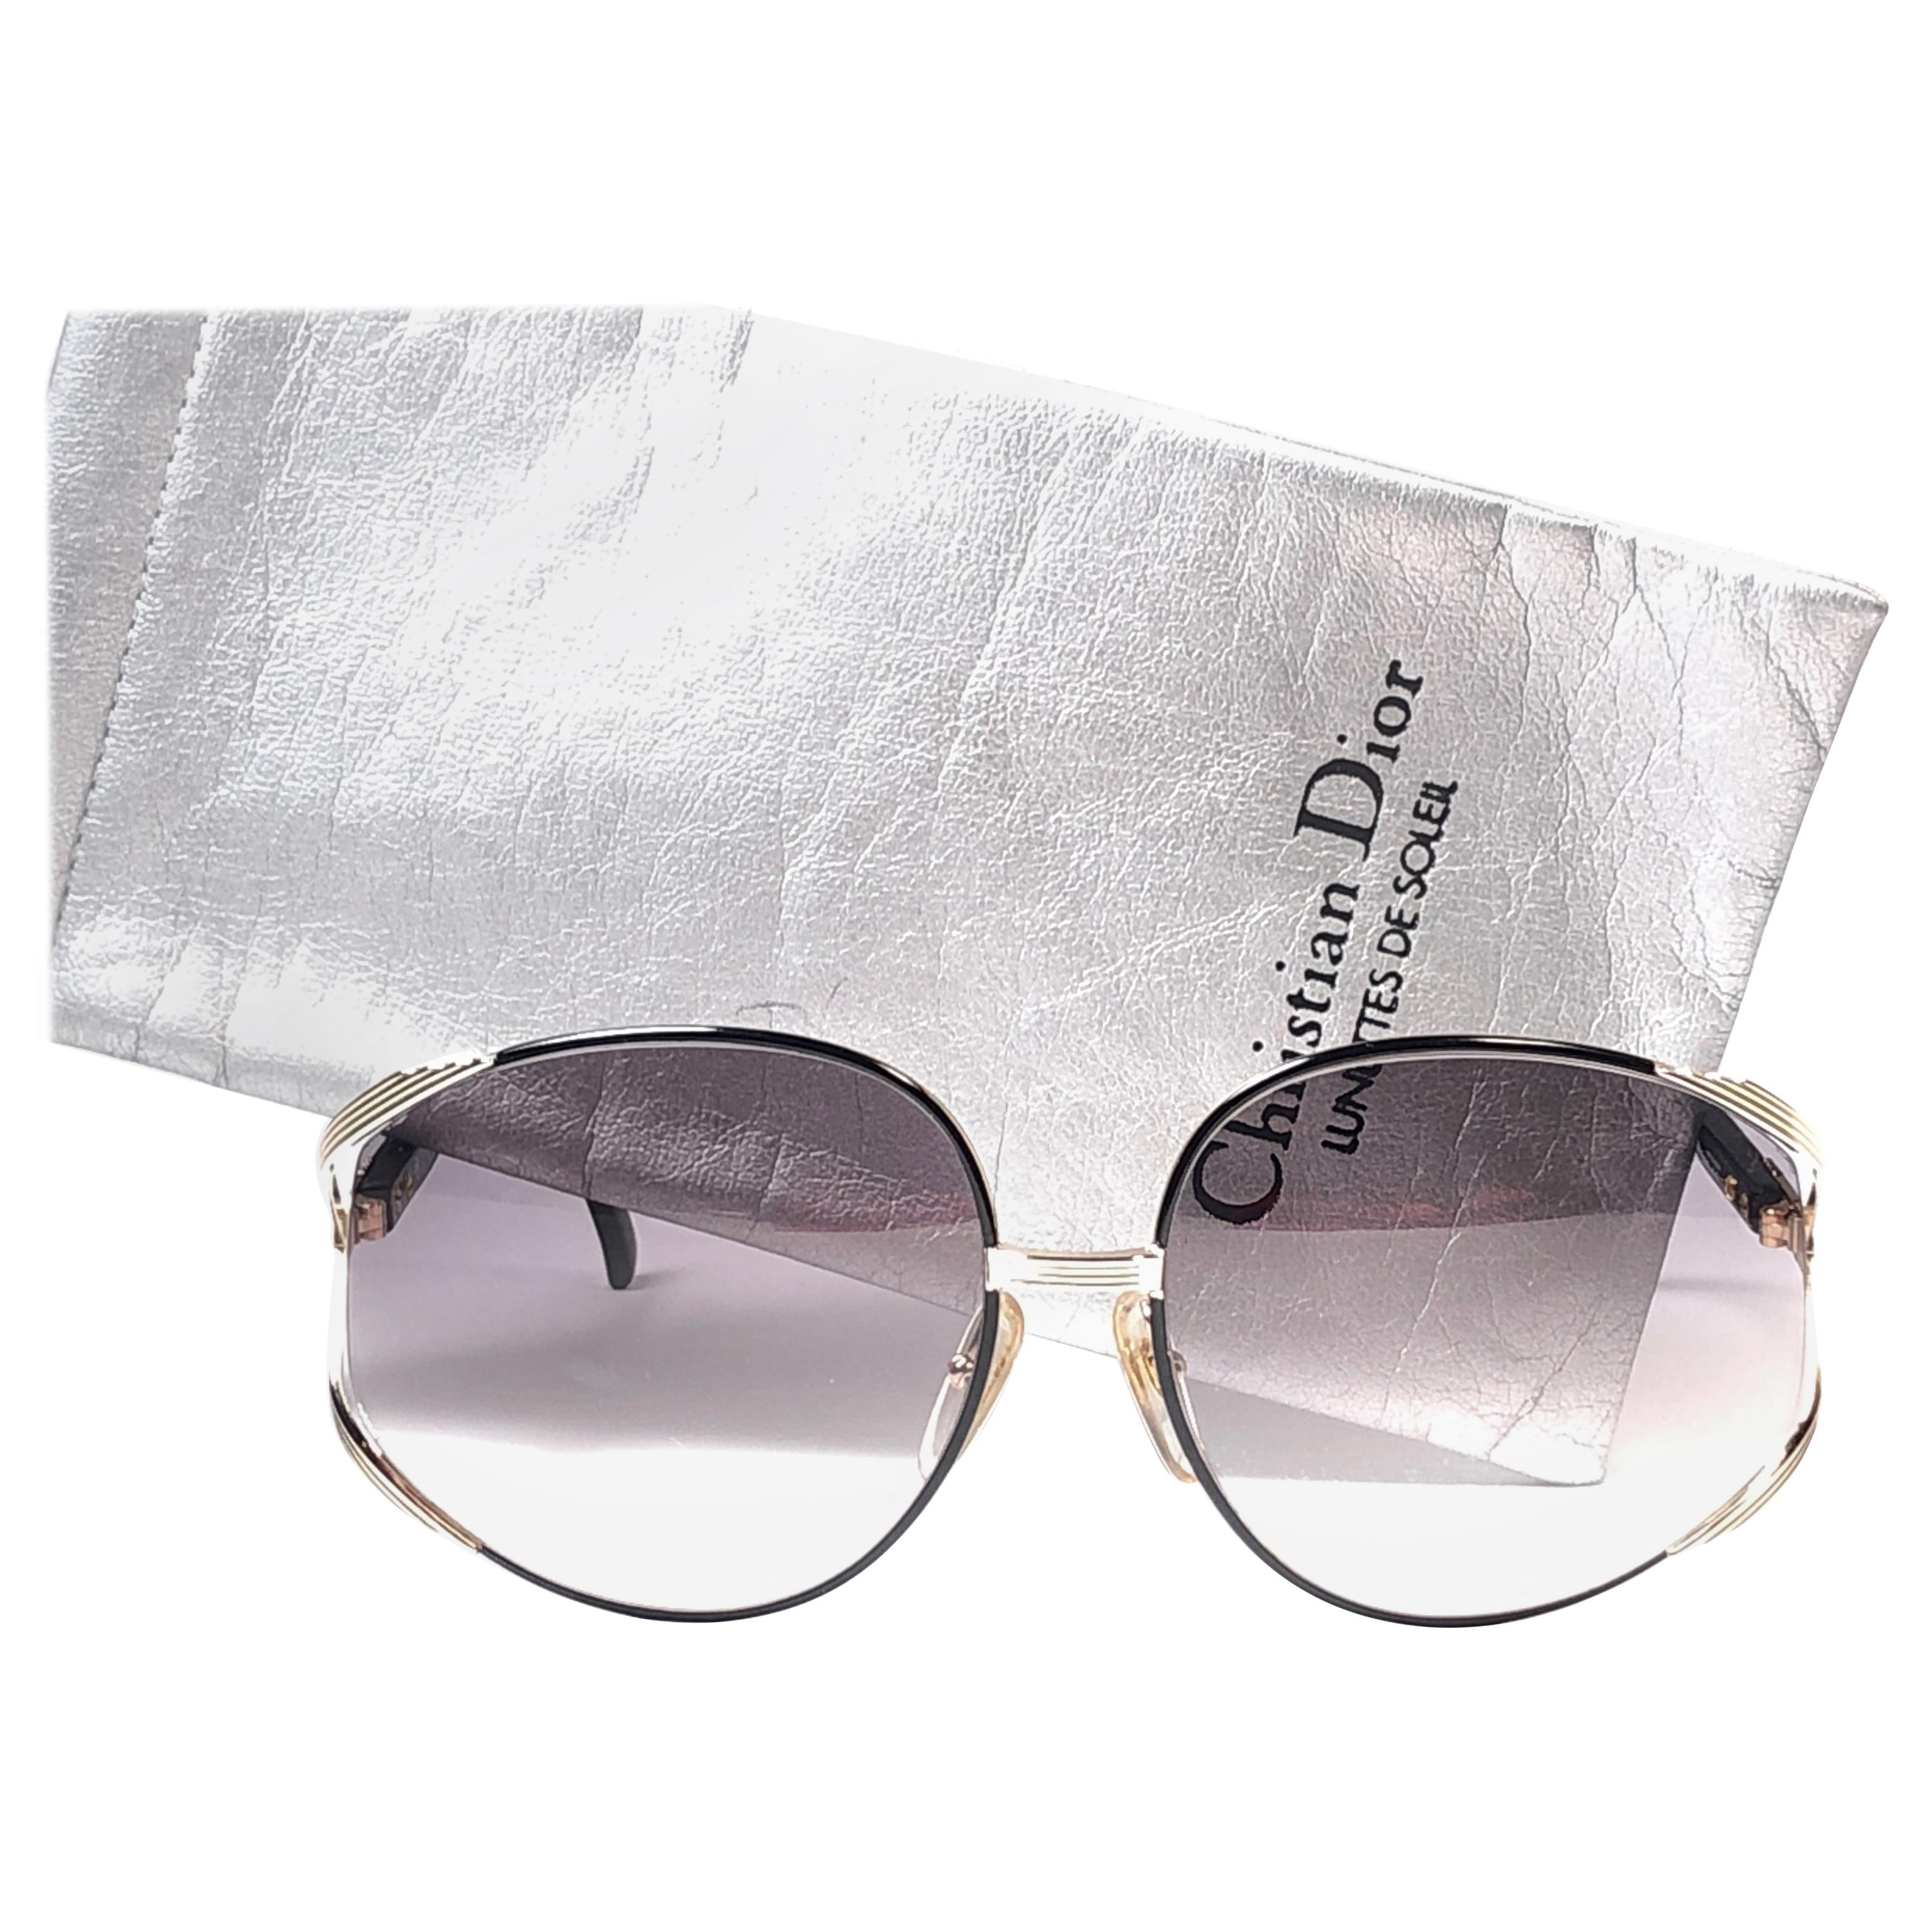 New Vintage Christian Dior 2050 46 Butterfly Gold & Black Sunglasses 